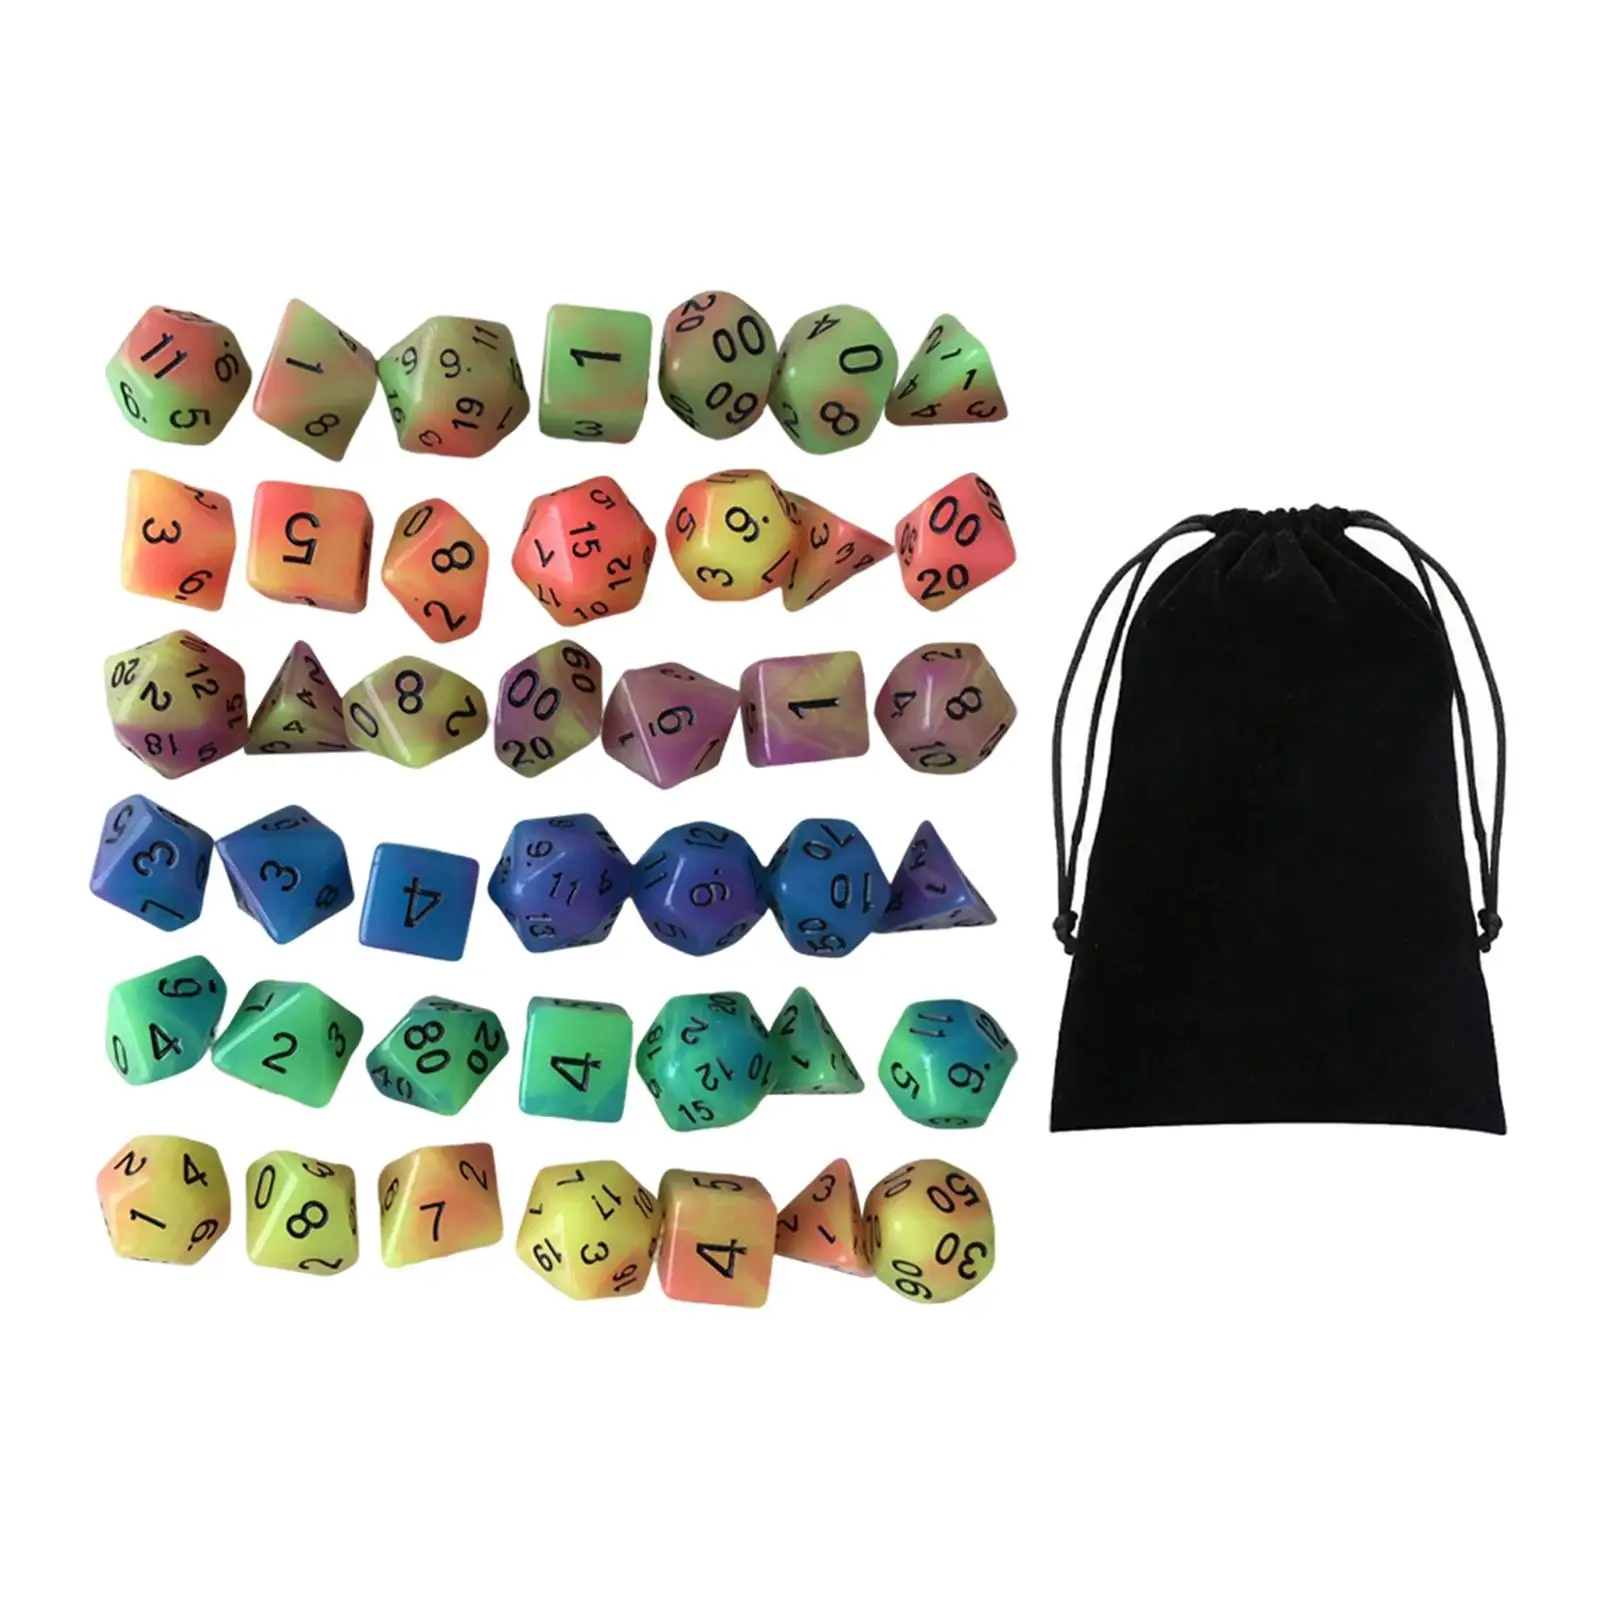 42pcs Acrylic Glowing Polyhedral Dices Set D4 D6 D8 D10 D12 D20 with Pouch Luminous Game Dice for MTG Math Teaching Role Playing